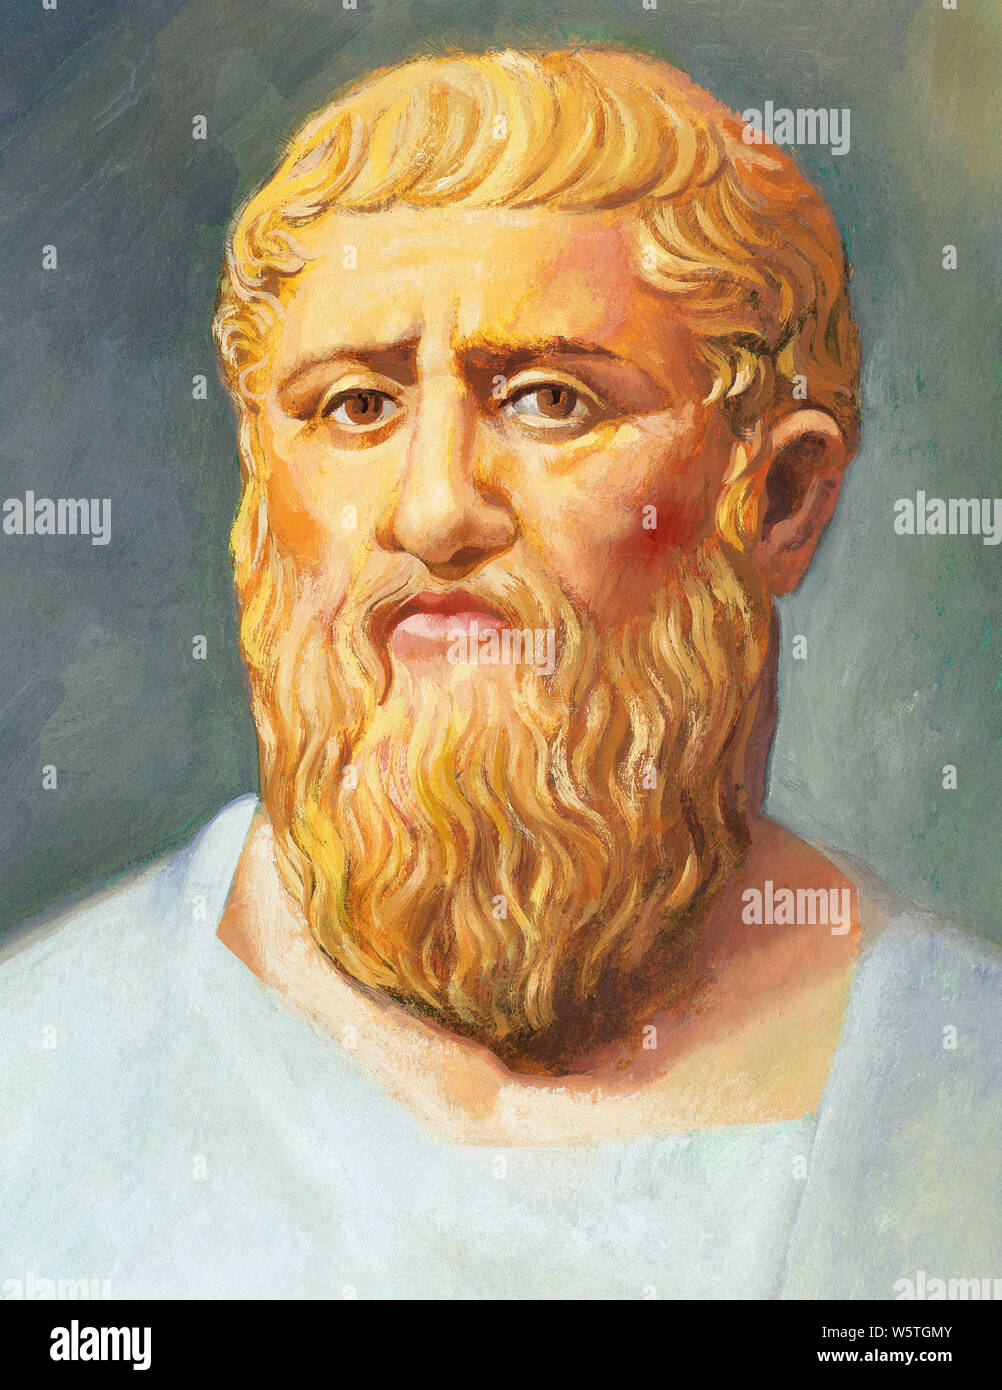 Plato (428 BC-348/347 BC). Greek philosopher, student of Socrates. Founder of the Academy. Watercolor. Stock Photo